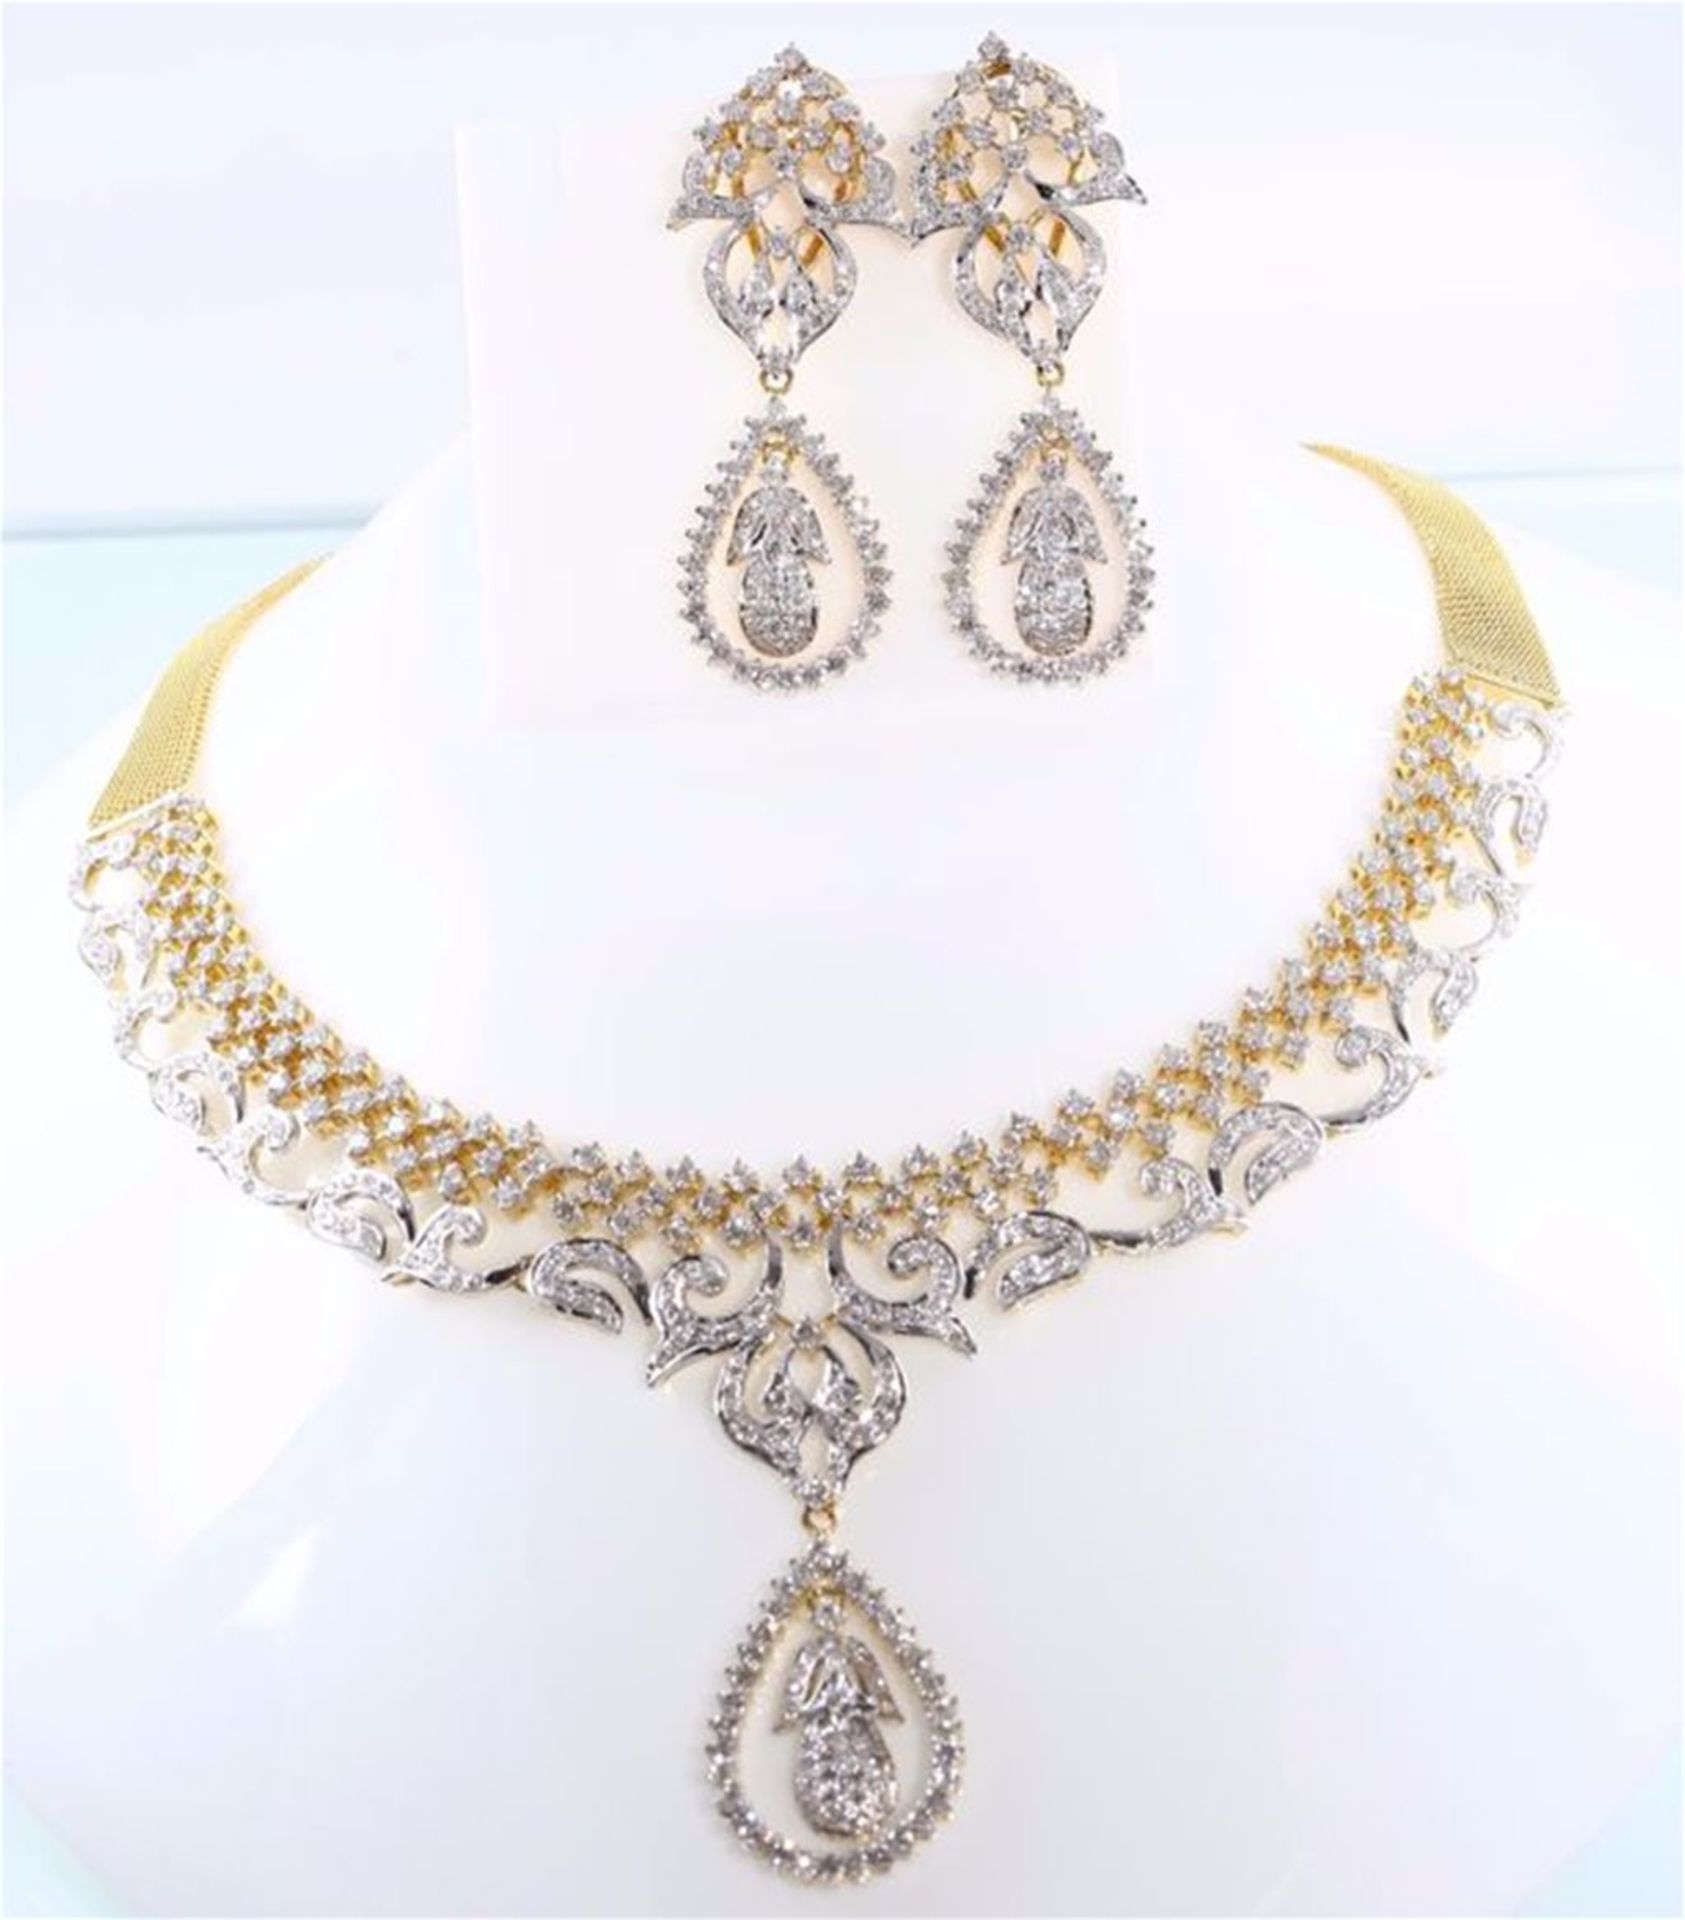 IGI Certified Large Yellow Gold Diamond Necklace with Chandelier Earrings